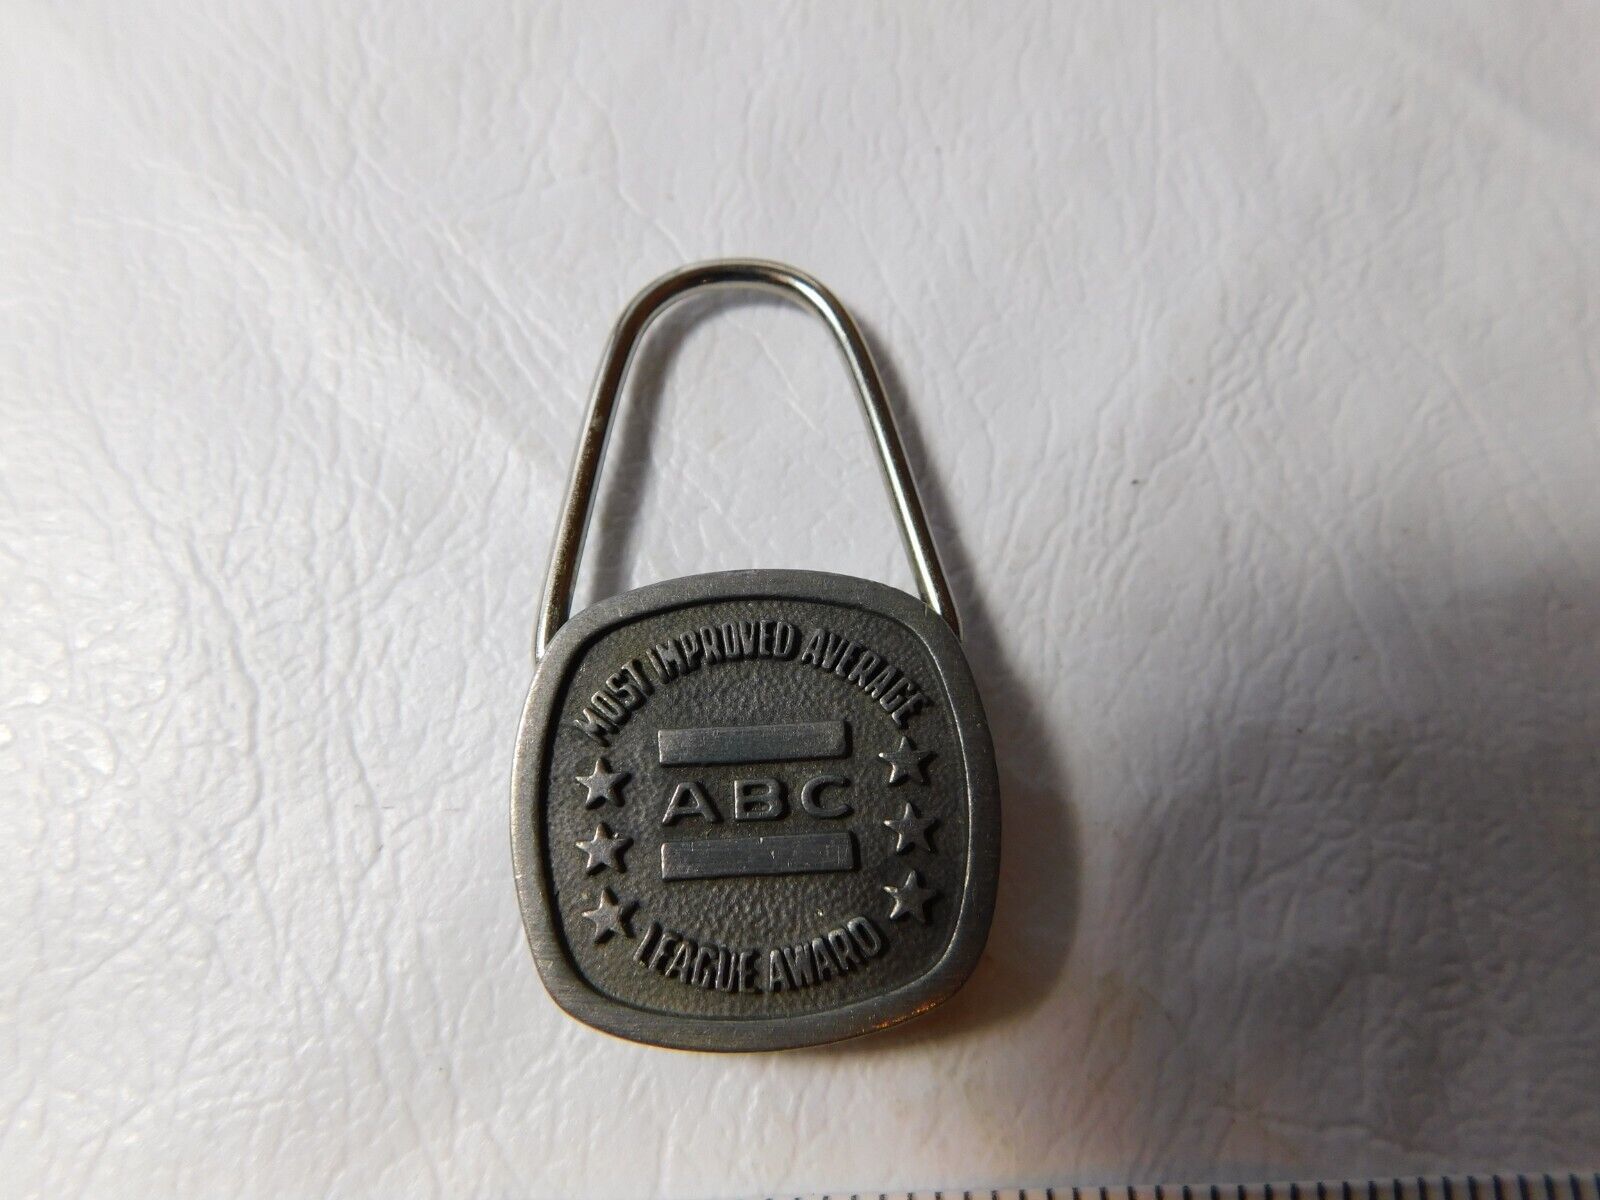 Primary image for ABC American bowling congress most improved average league award keychain ring